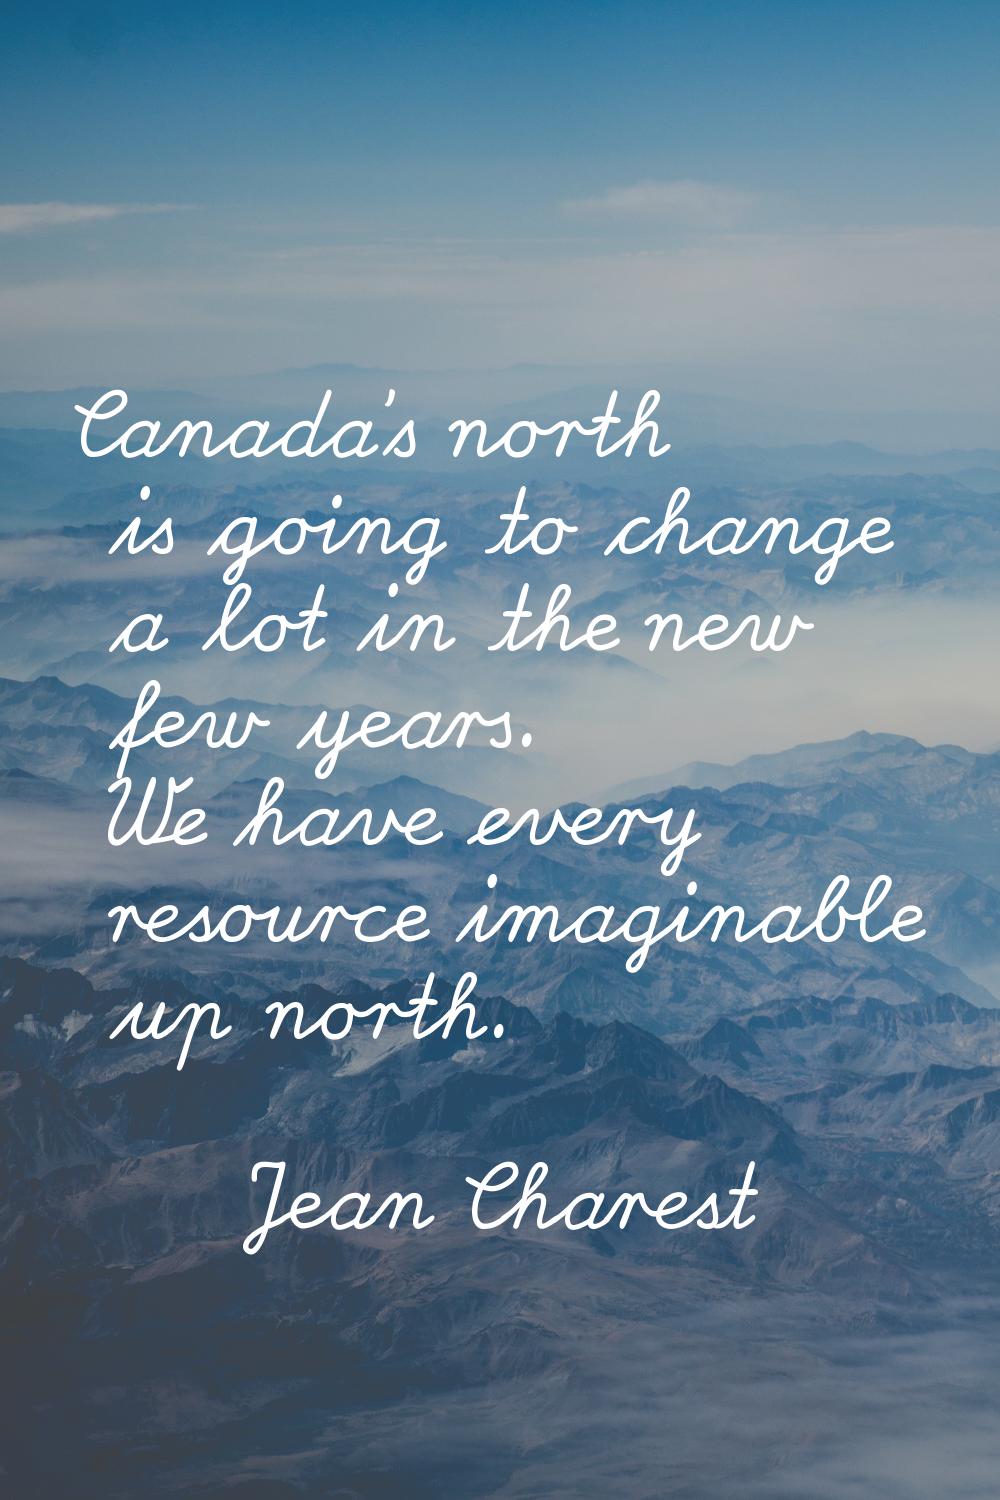 Canada's north is going to change a lot in the new few years. We have every resource imaginable up 